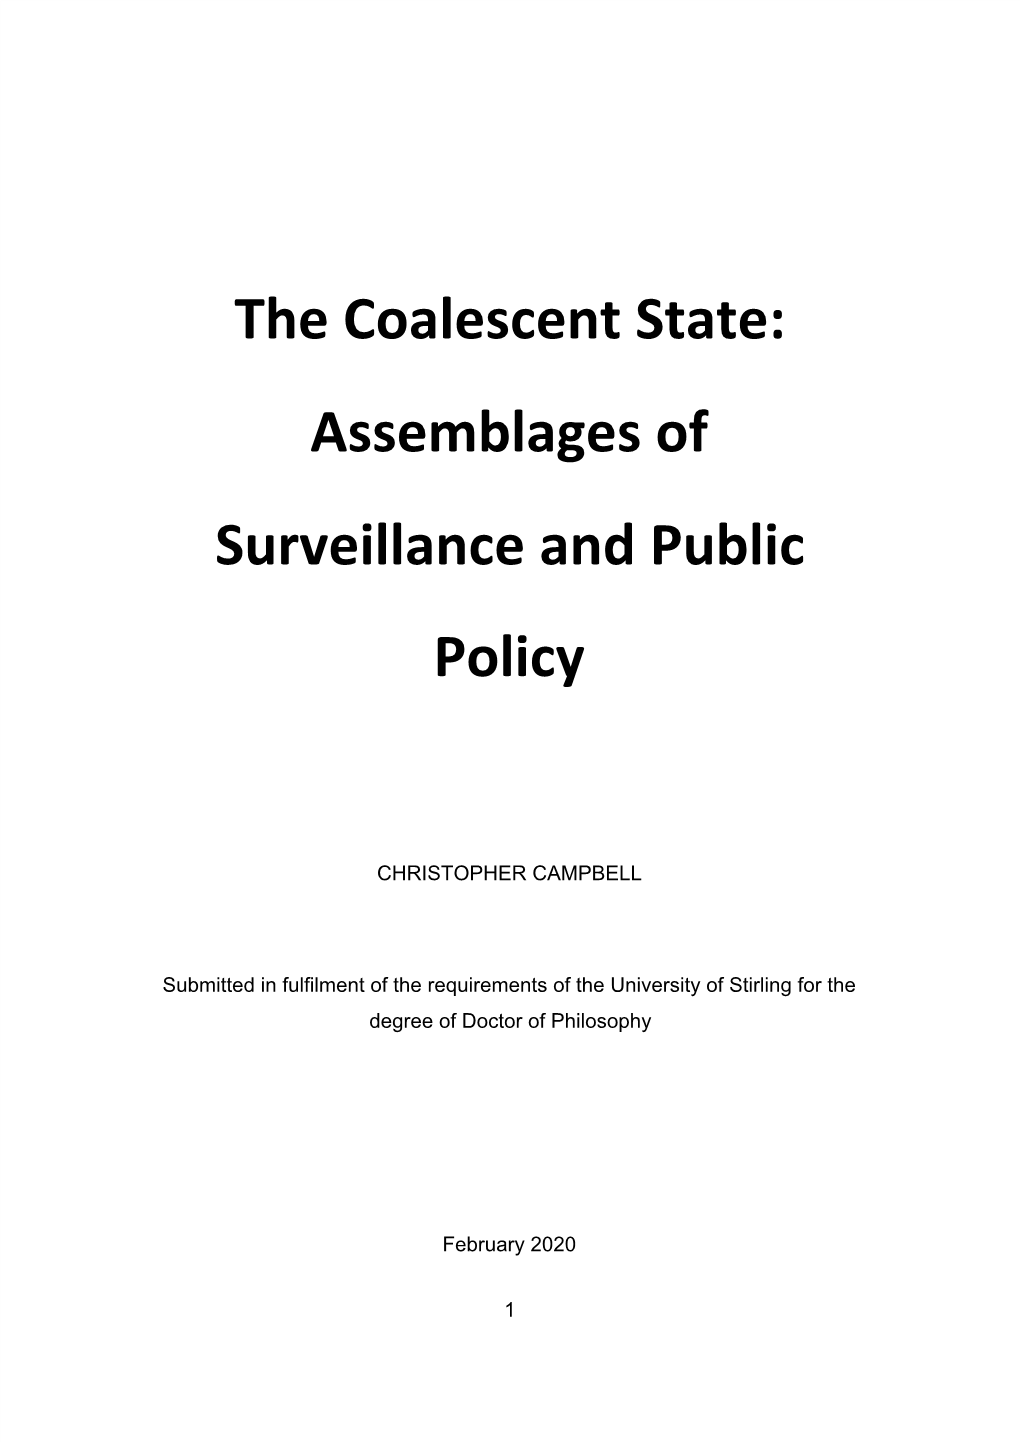 The Coalescent State: Assemblages of Surveillance and Public Policy